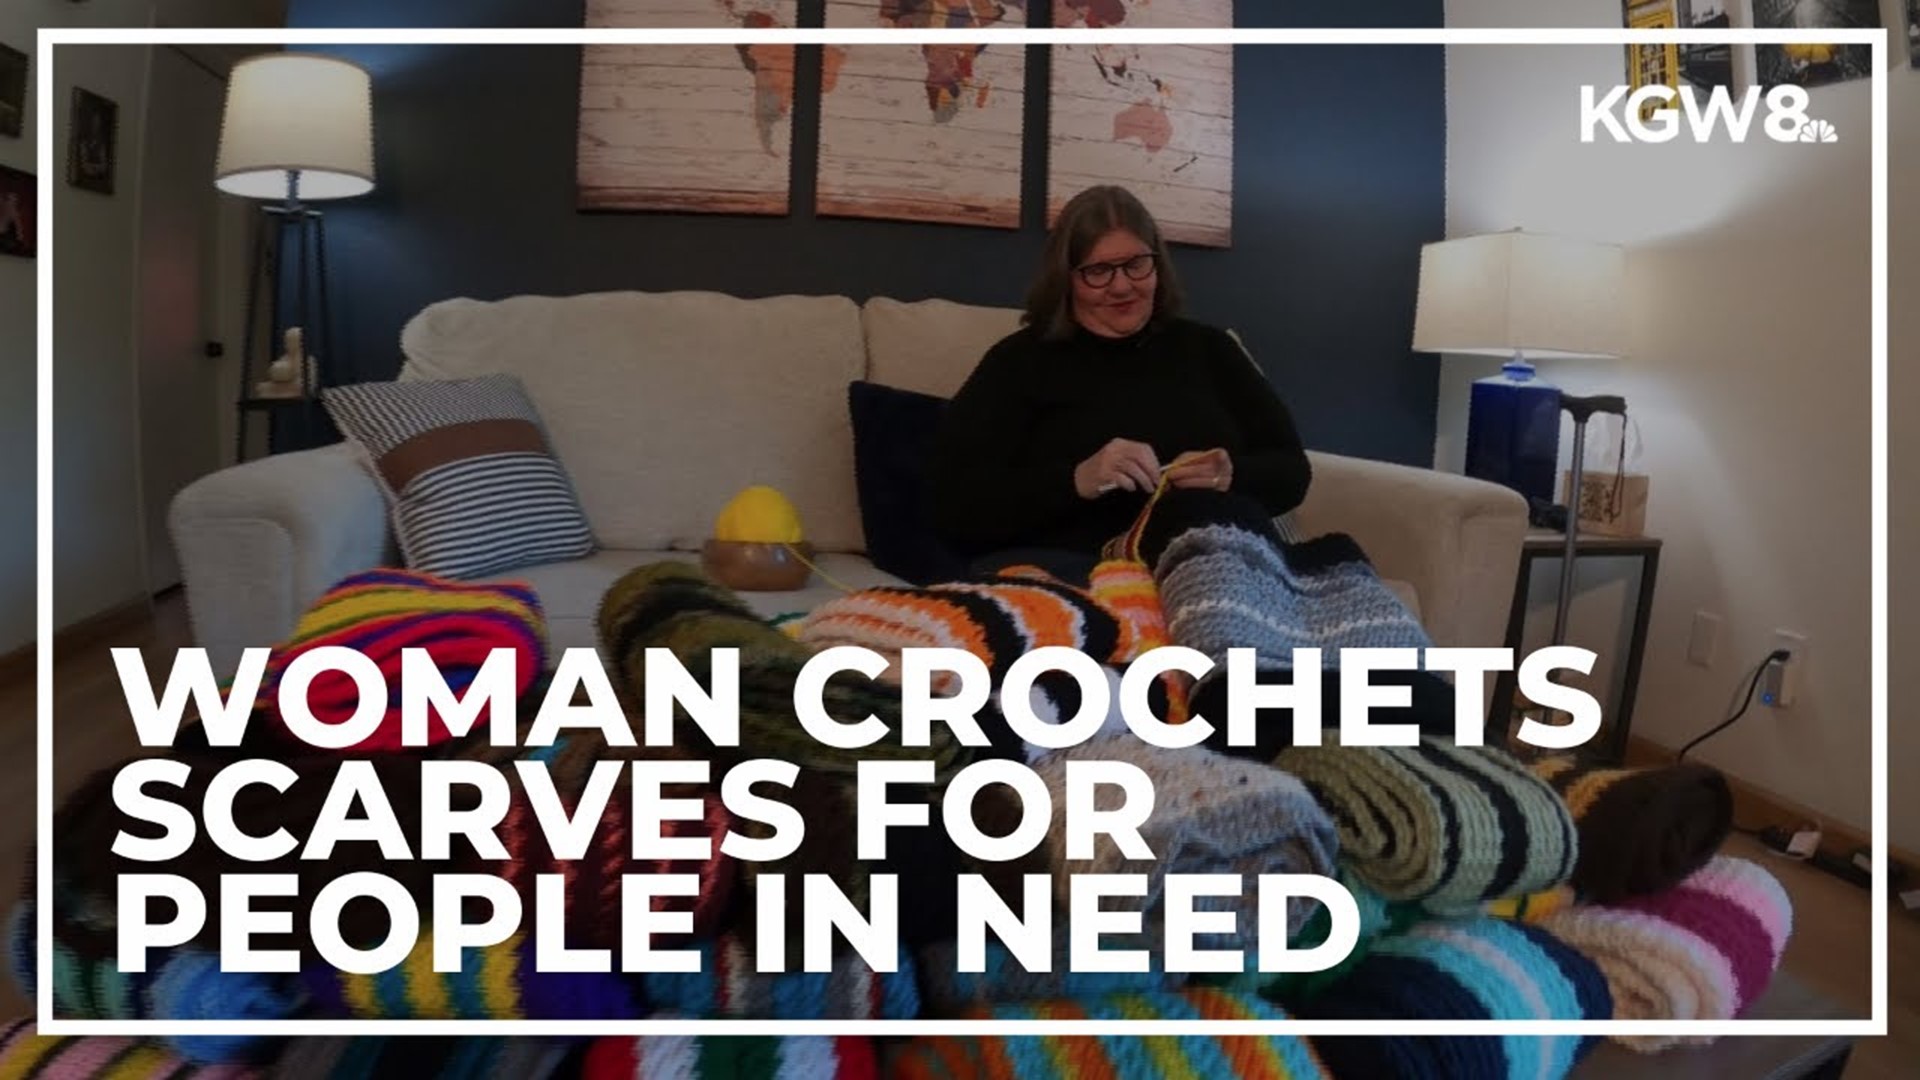 Judy Switzer started crocheting the scarves when the pandemic hit. She didn't know what to do with them until she saw the houseless population on Portland's streets.